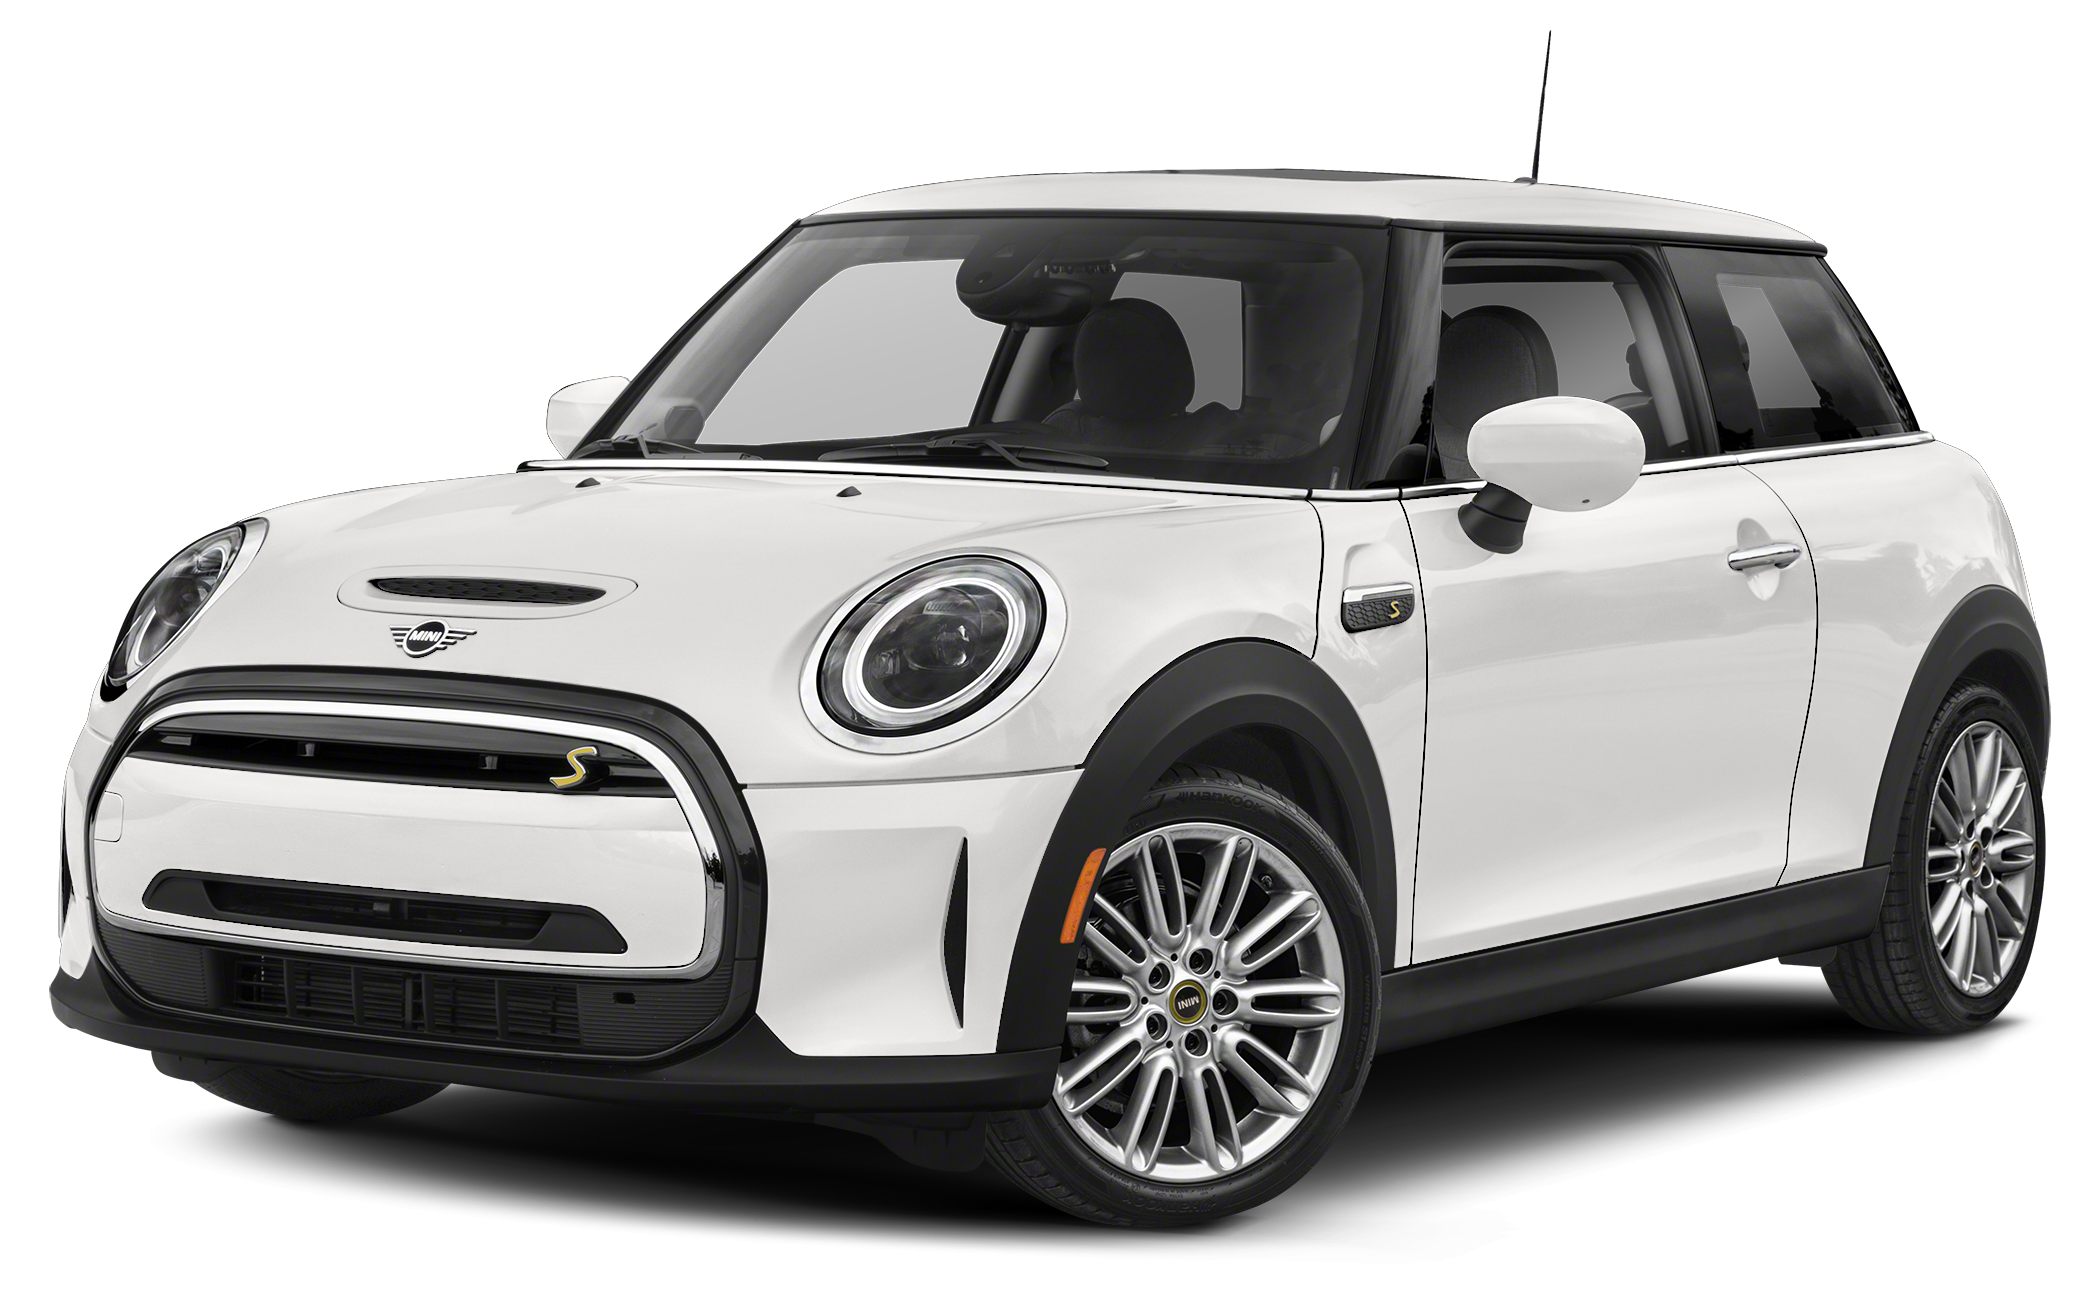 2 Mini Electric Cars That You Can Buy Right Now